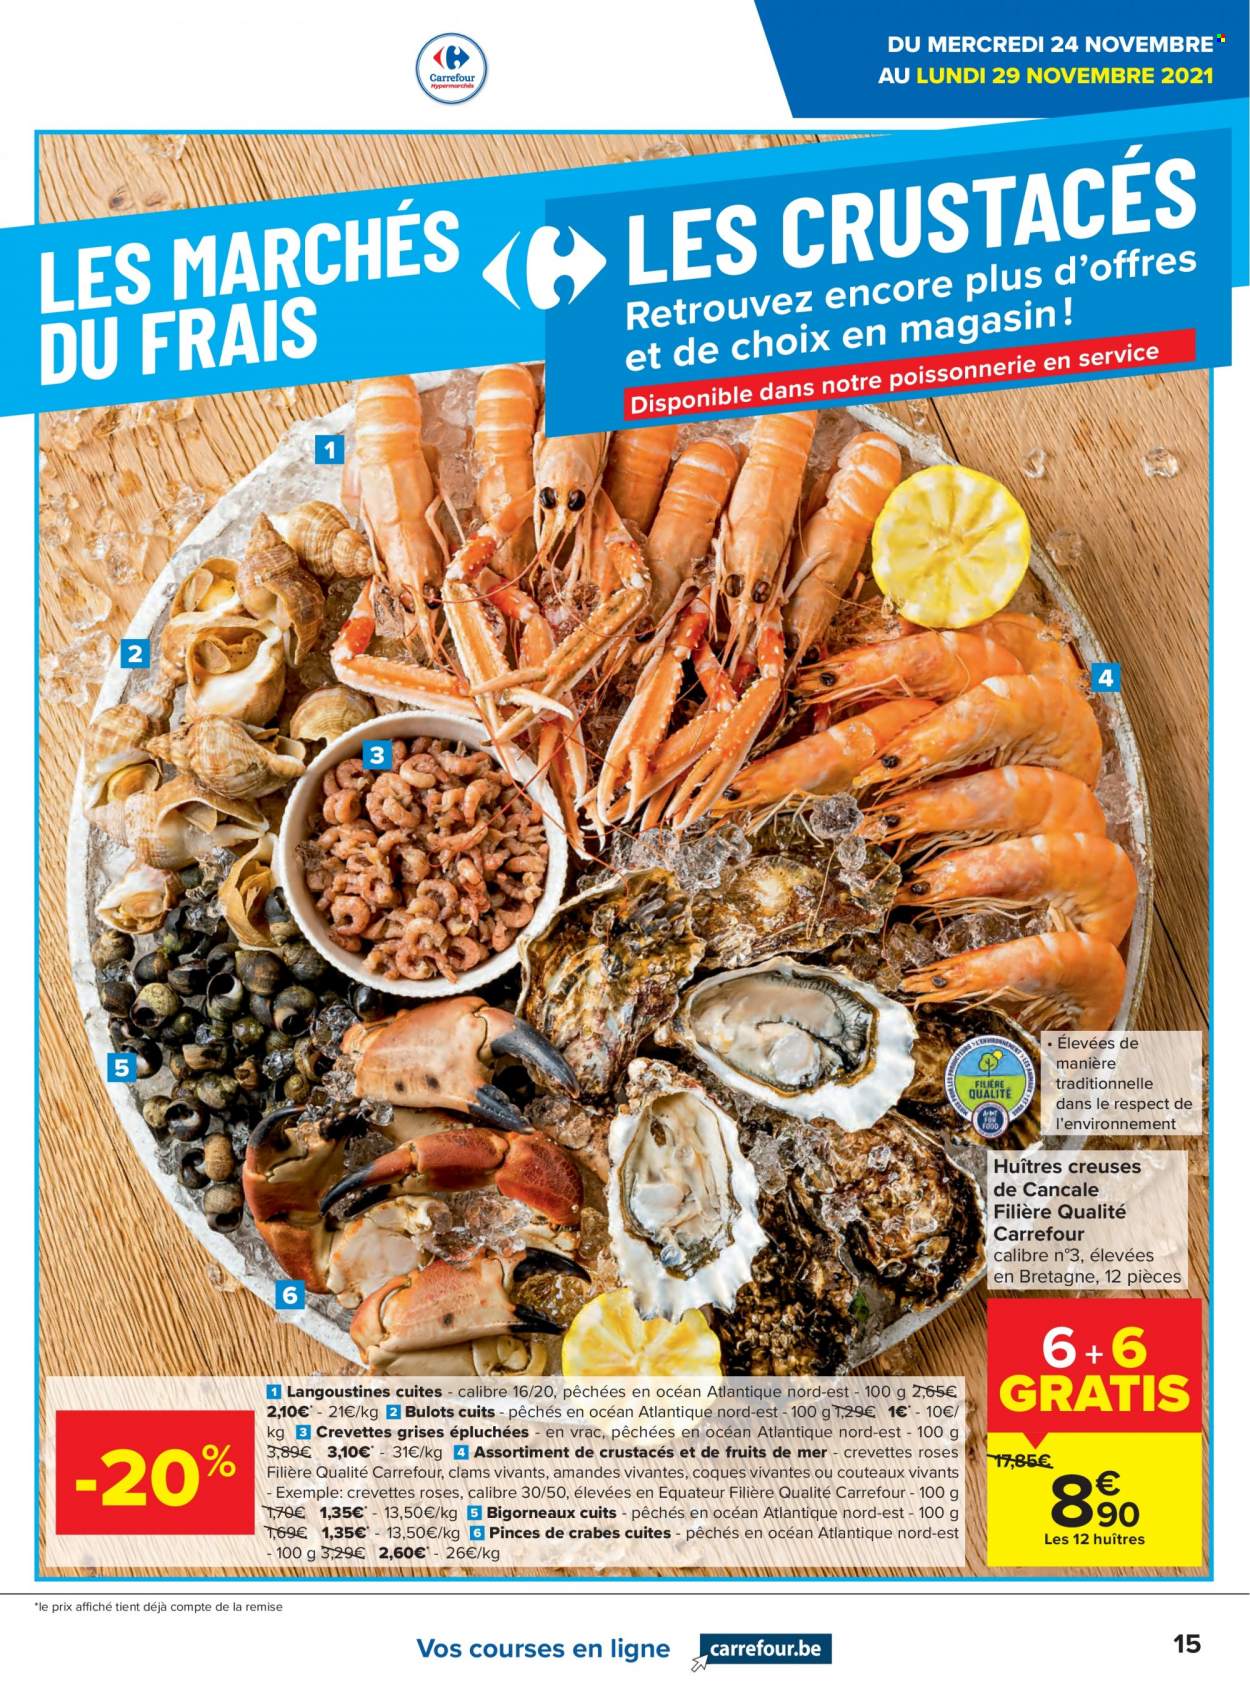 Catalogue Carrefour hypermarkt - 24.11.2021 - 6.12.2021. Page 15.